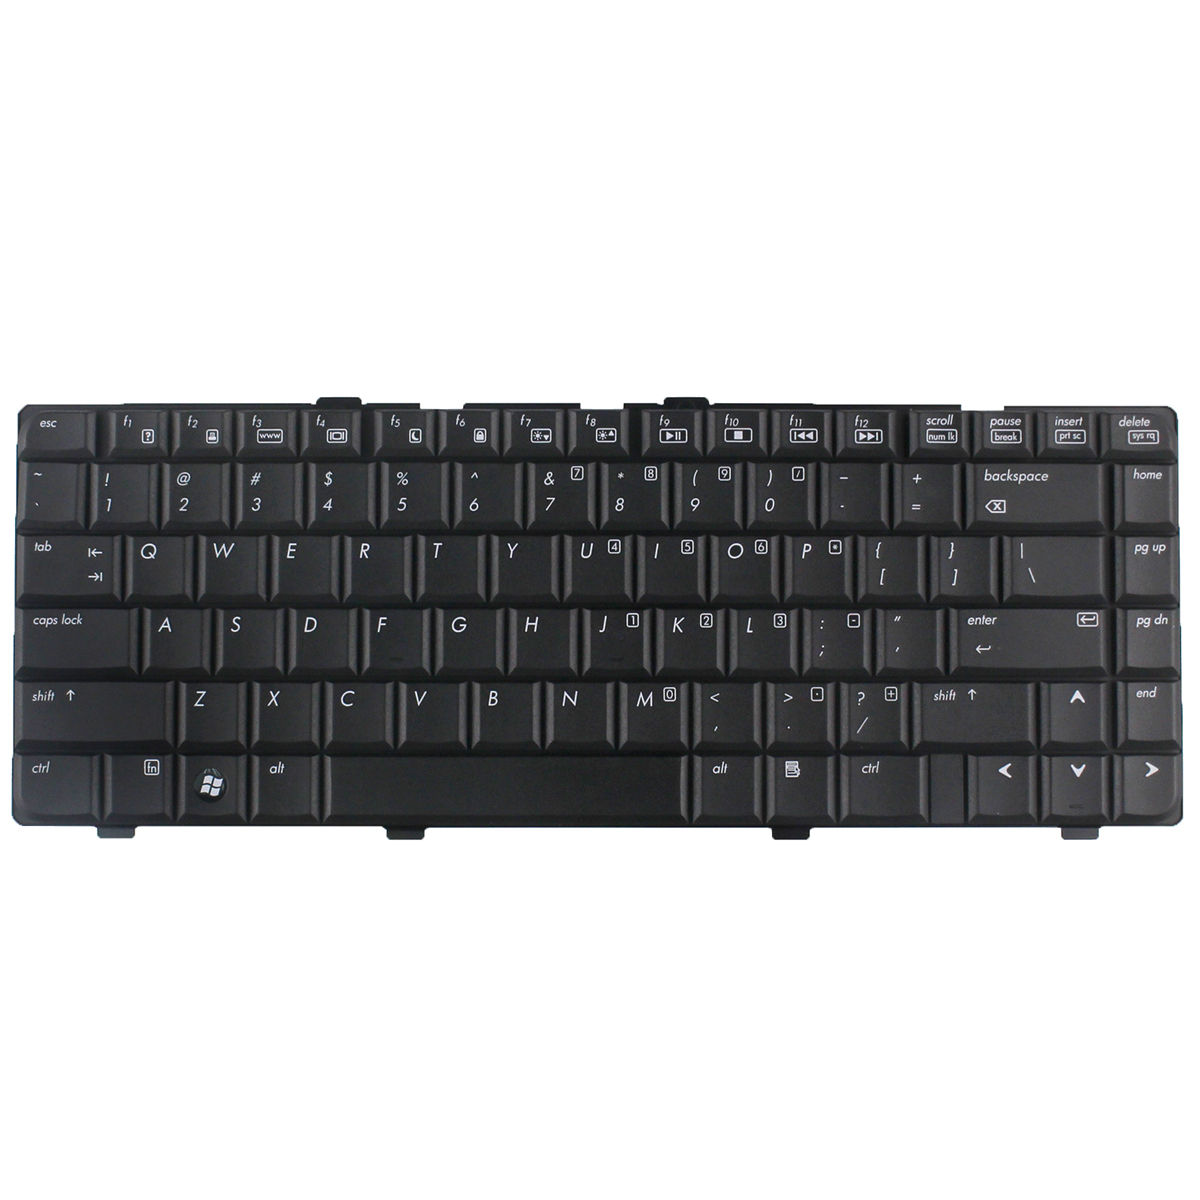 New Keyboard for HP Pavilion DV6000 Series Laptops 441427-001 43 - Click Image to Close